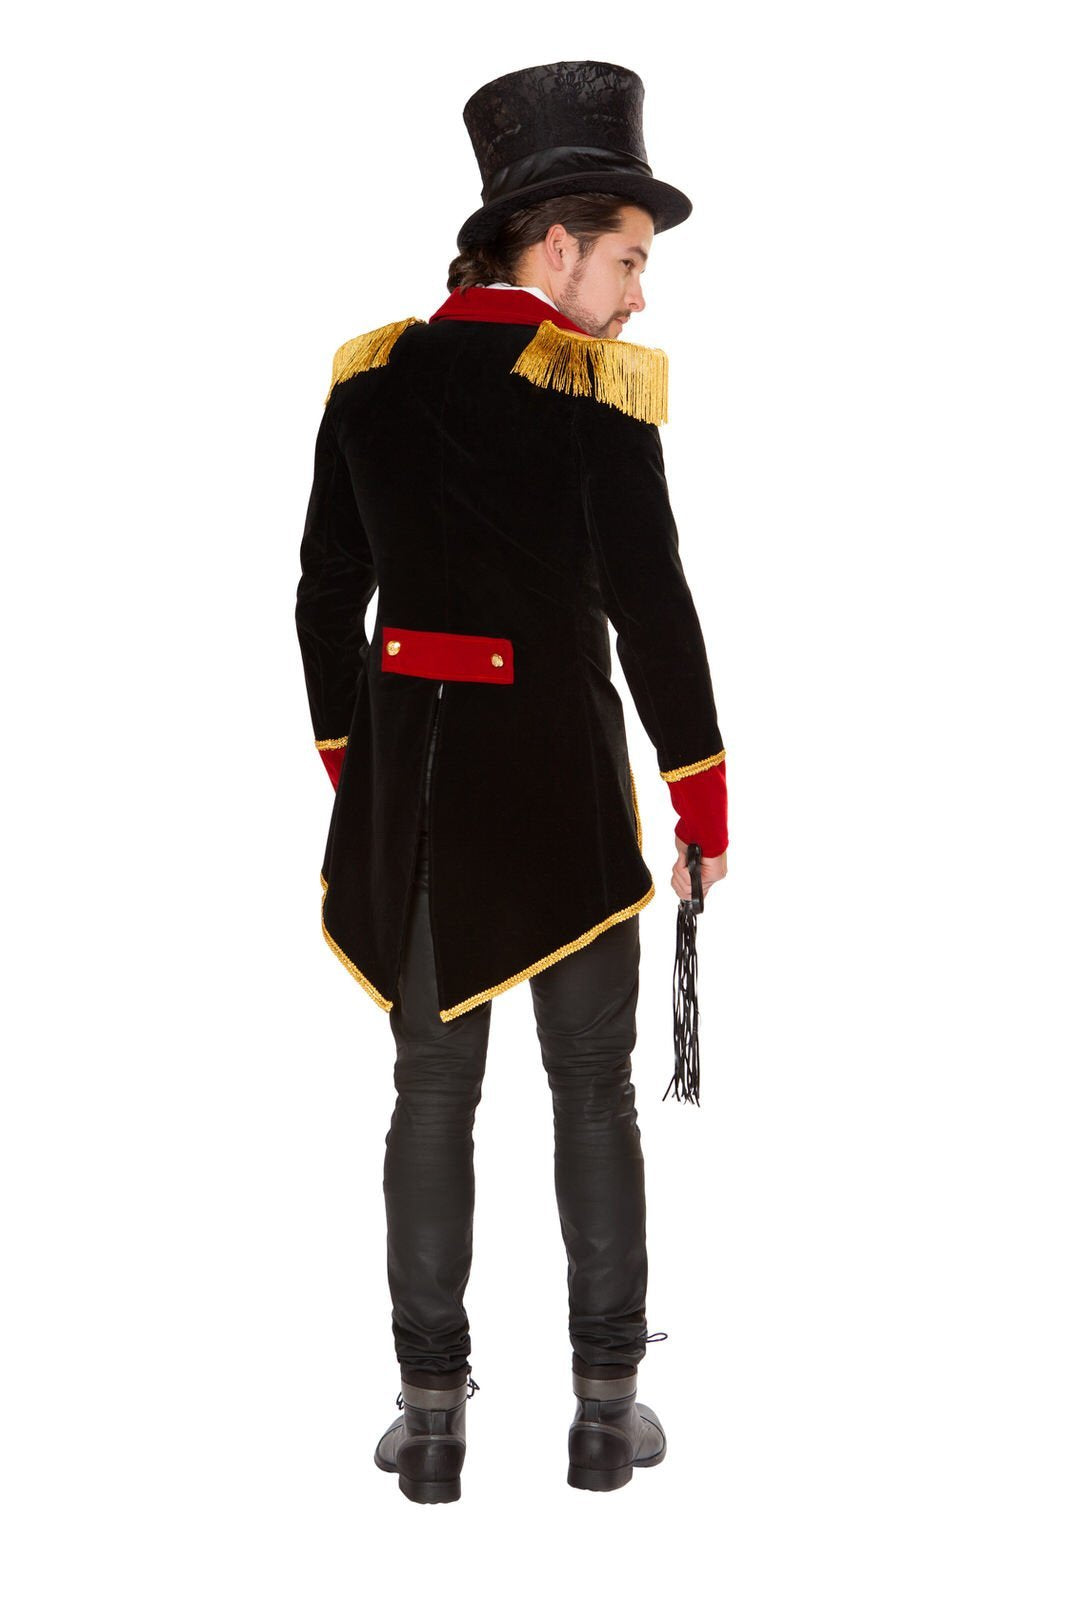 Buy 3pc Men’s Ringmaster from RomaRetailShop for 99.99 with Same Day Shipping Designed by Roma Costume 4820-AS-S